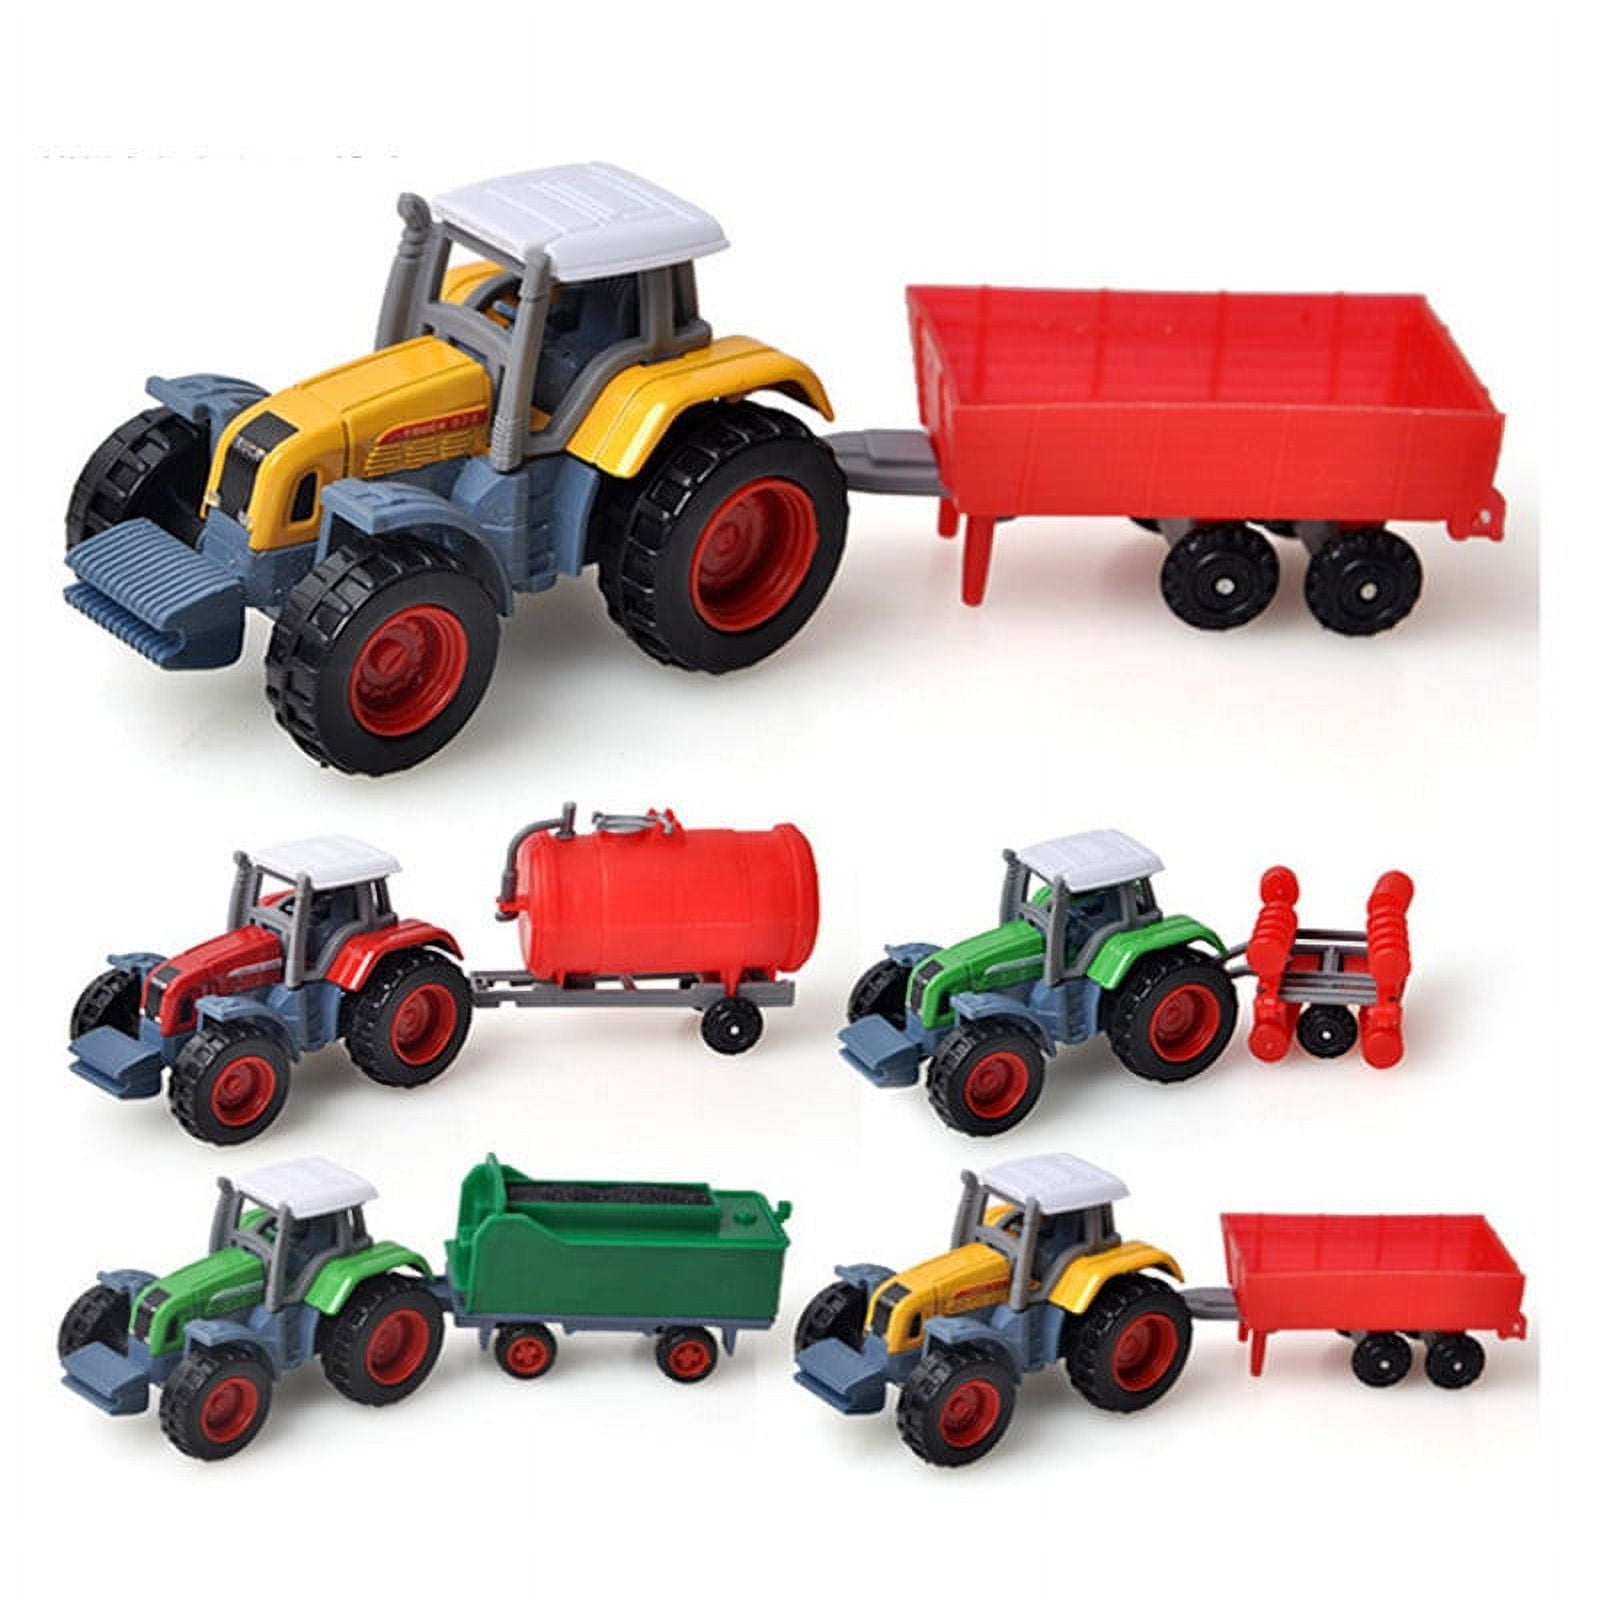 Kiddopark Truck Toy Tractor With